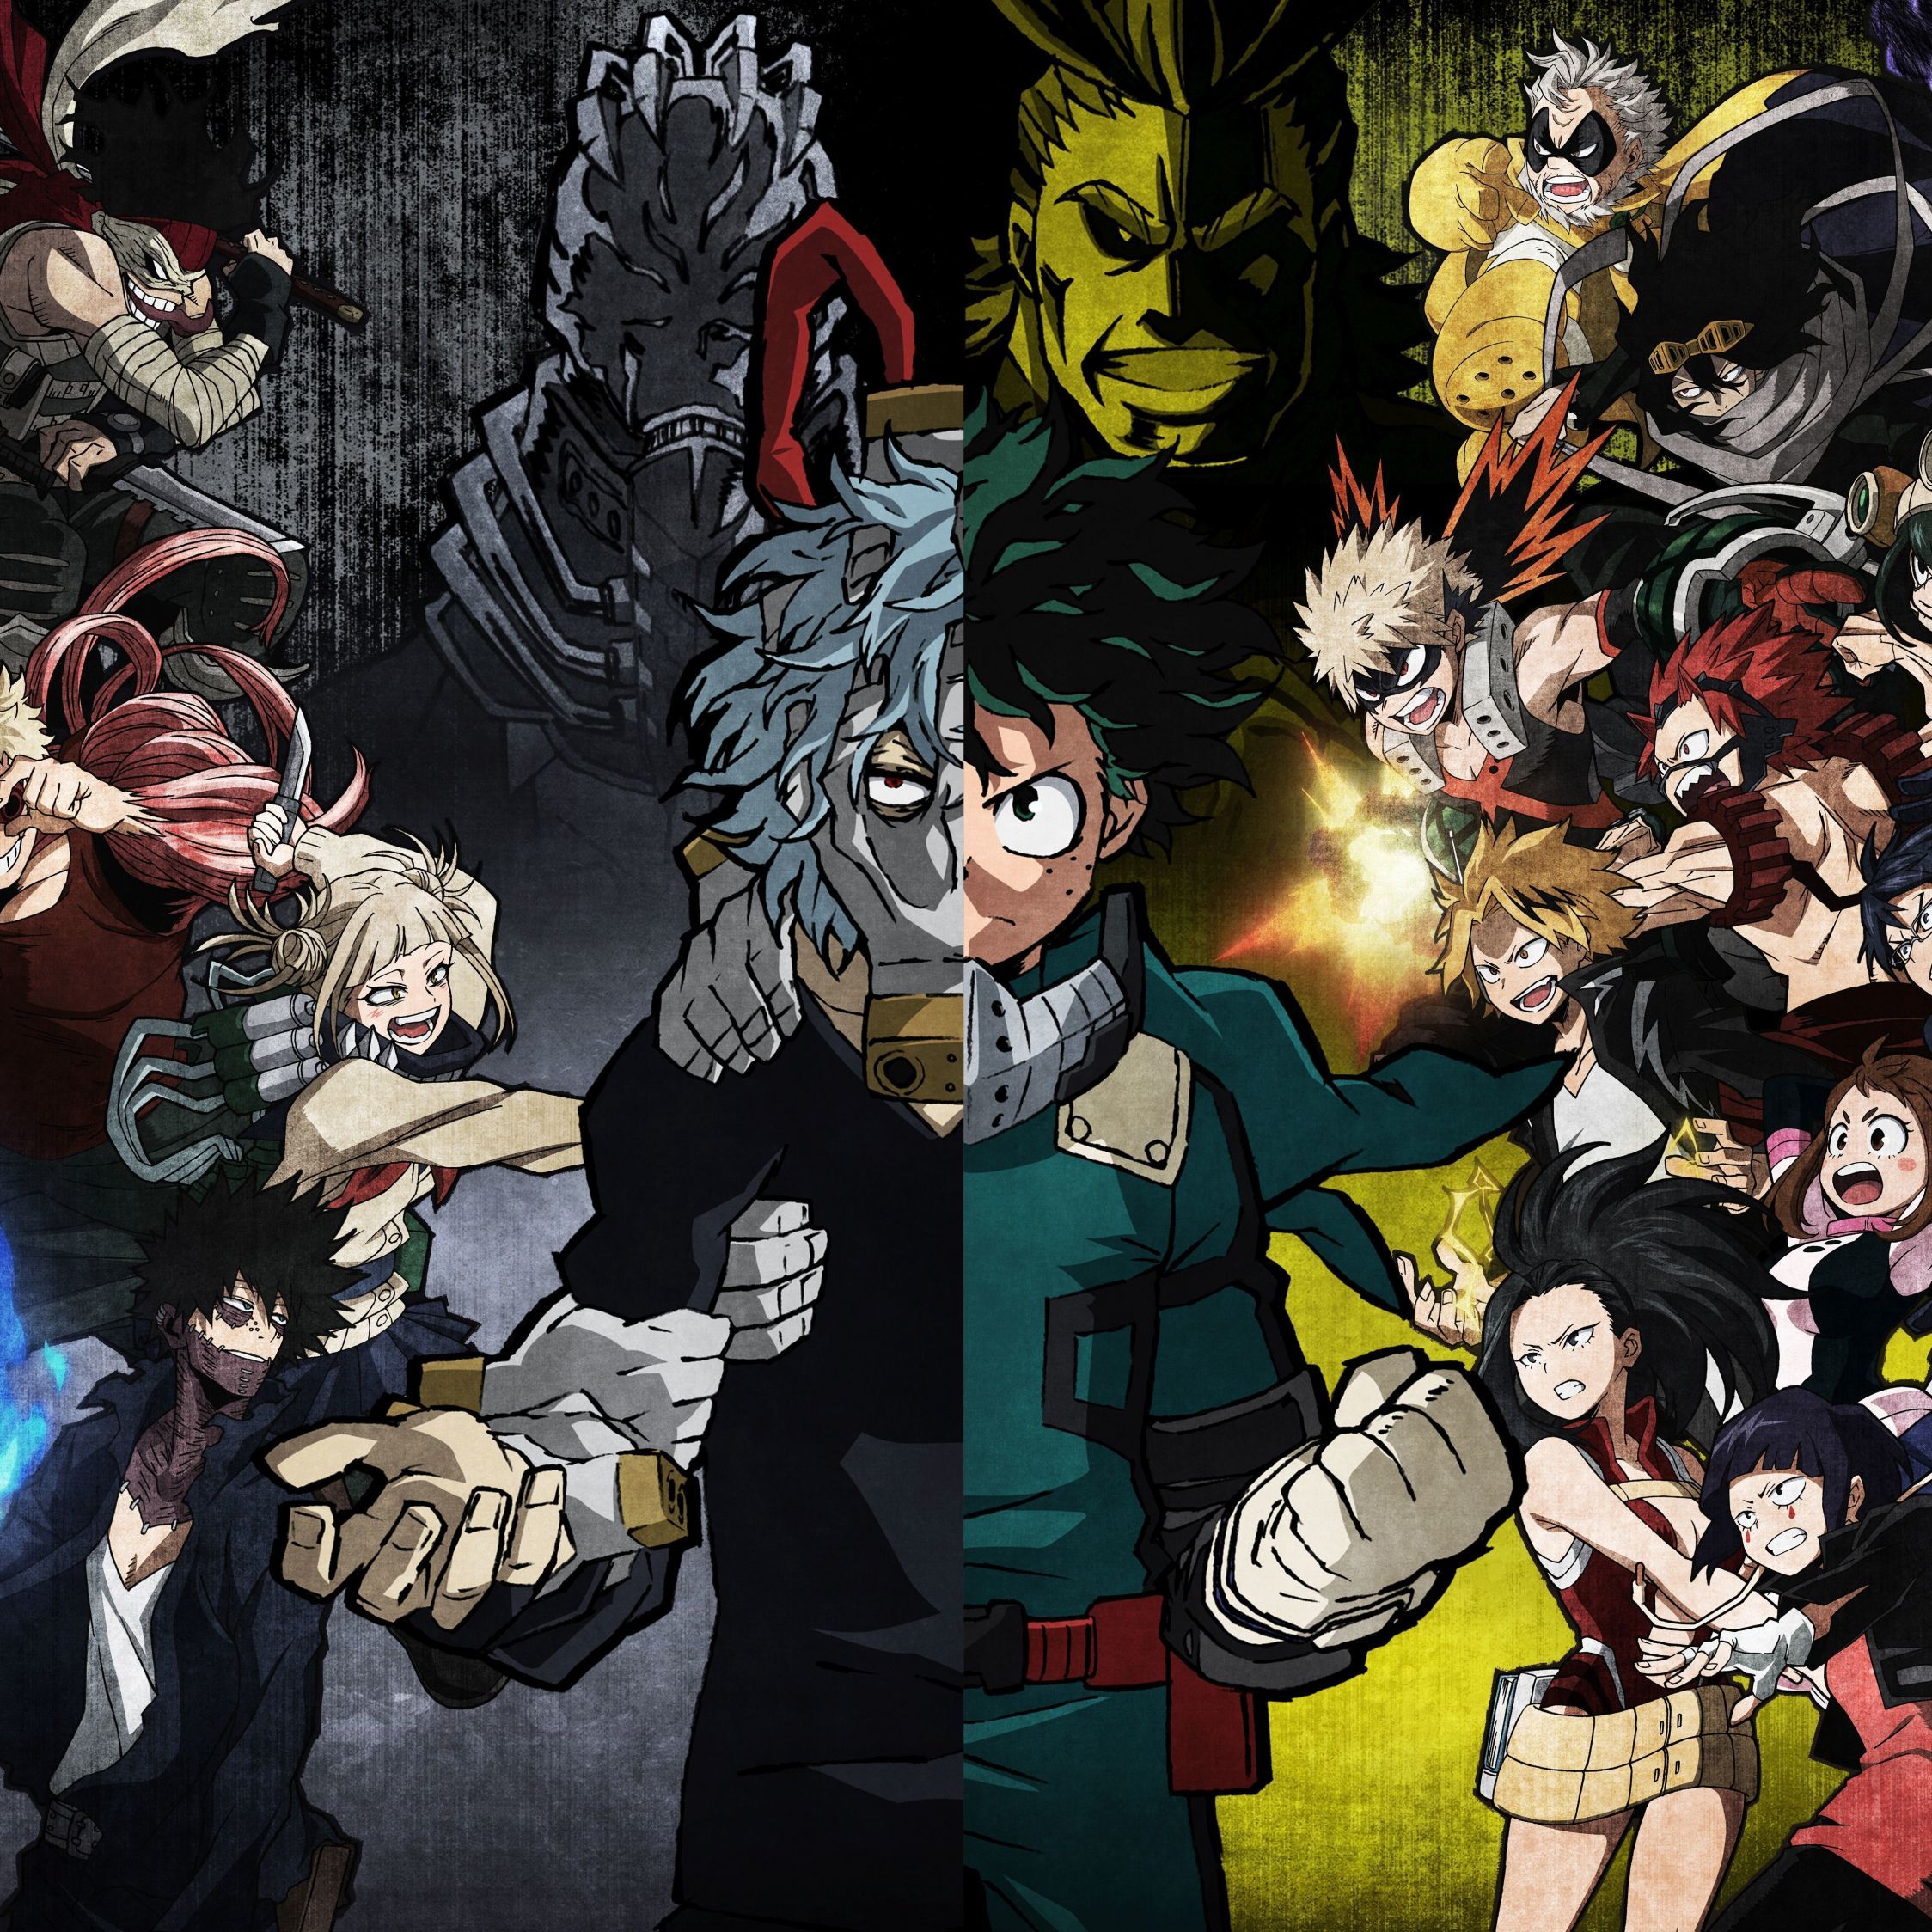 A group of anime characters in the same poster - My Hero Academia